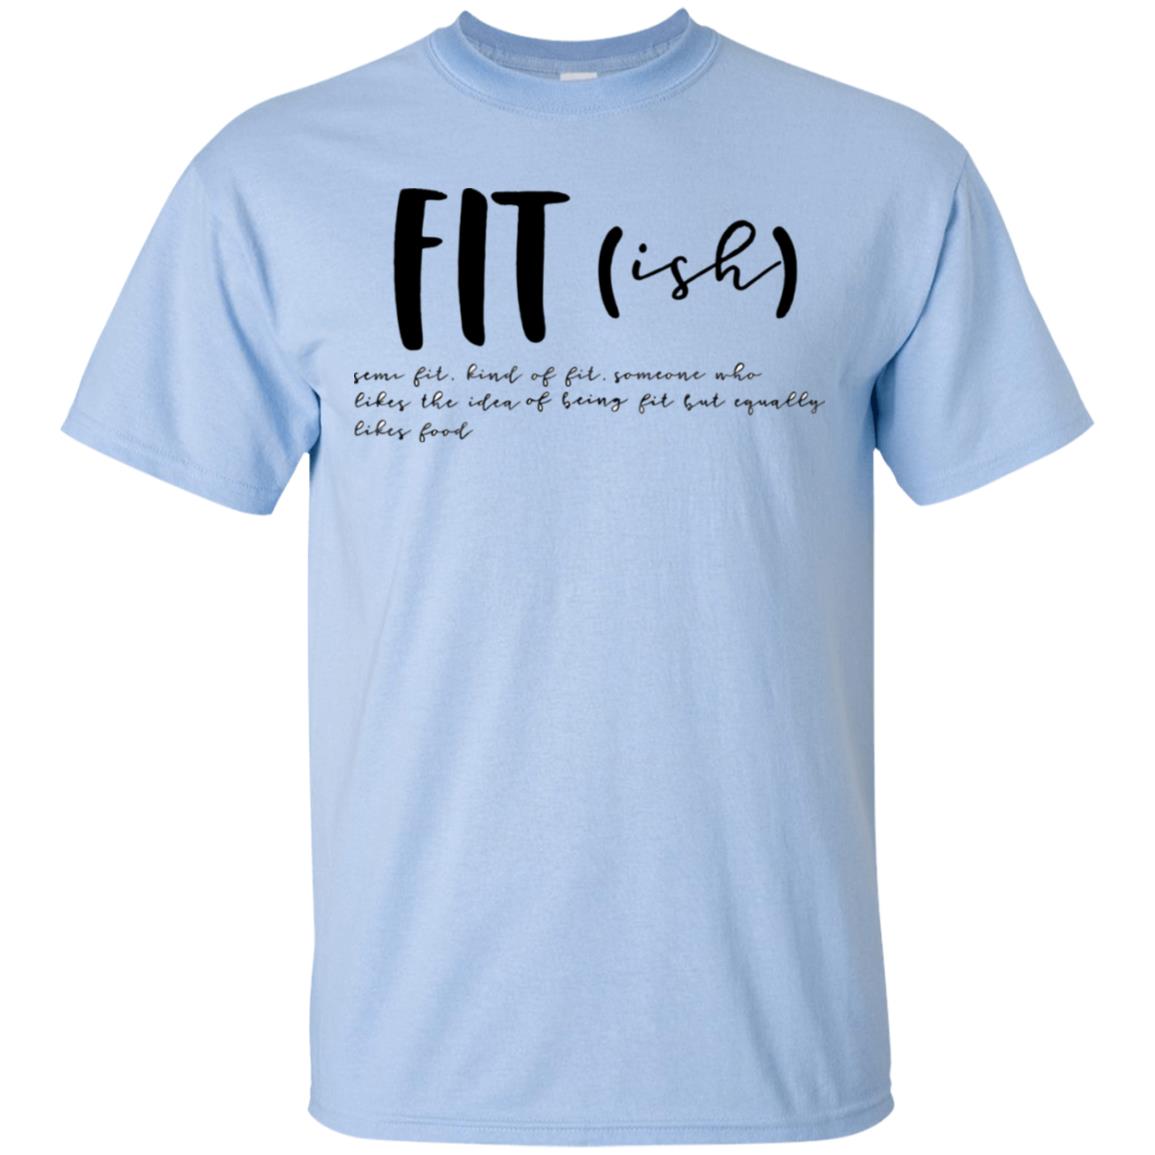 Fit (ish) Word Definition Funny Workout Fitness Shirt Tank top long sleeves  - Q-Finder Trending Design T Shirt